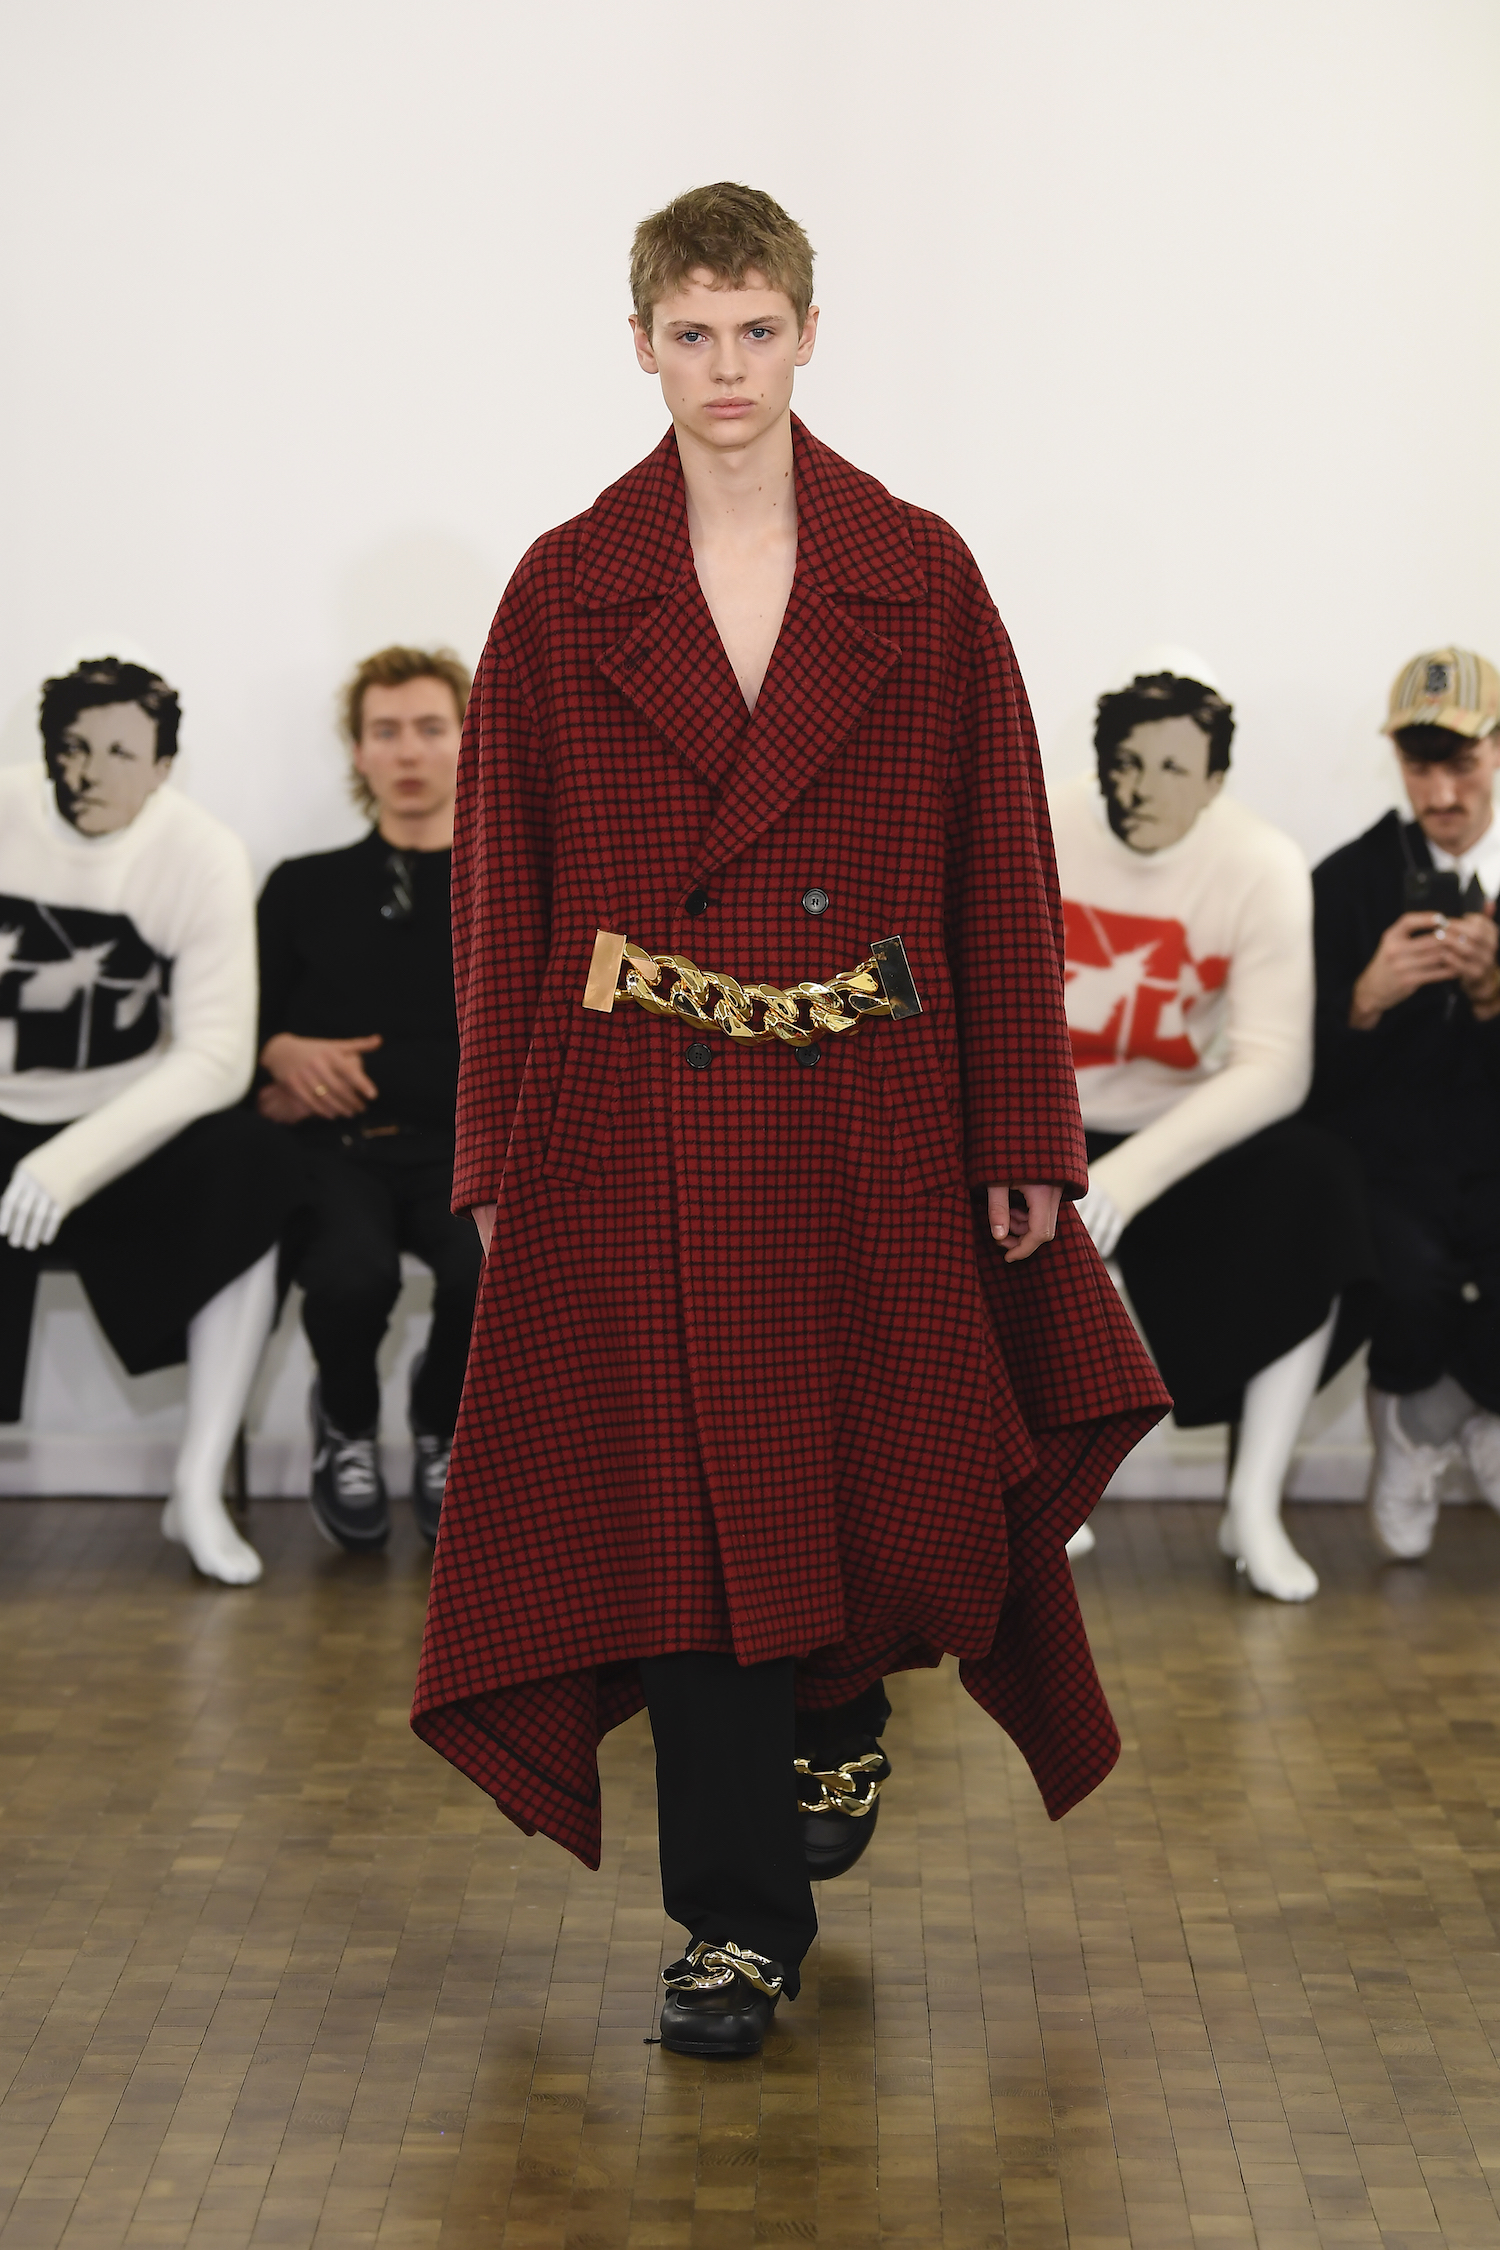 JW ANDERSON by Jonathan Anderson + FW2020 + LONDON FASHION WEEK. Runway  images from the FW2020 Collection by JW ANDERSON by Jonathan…